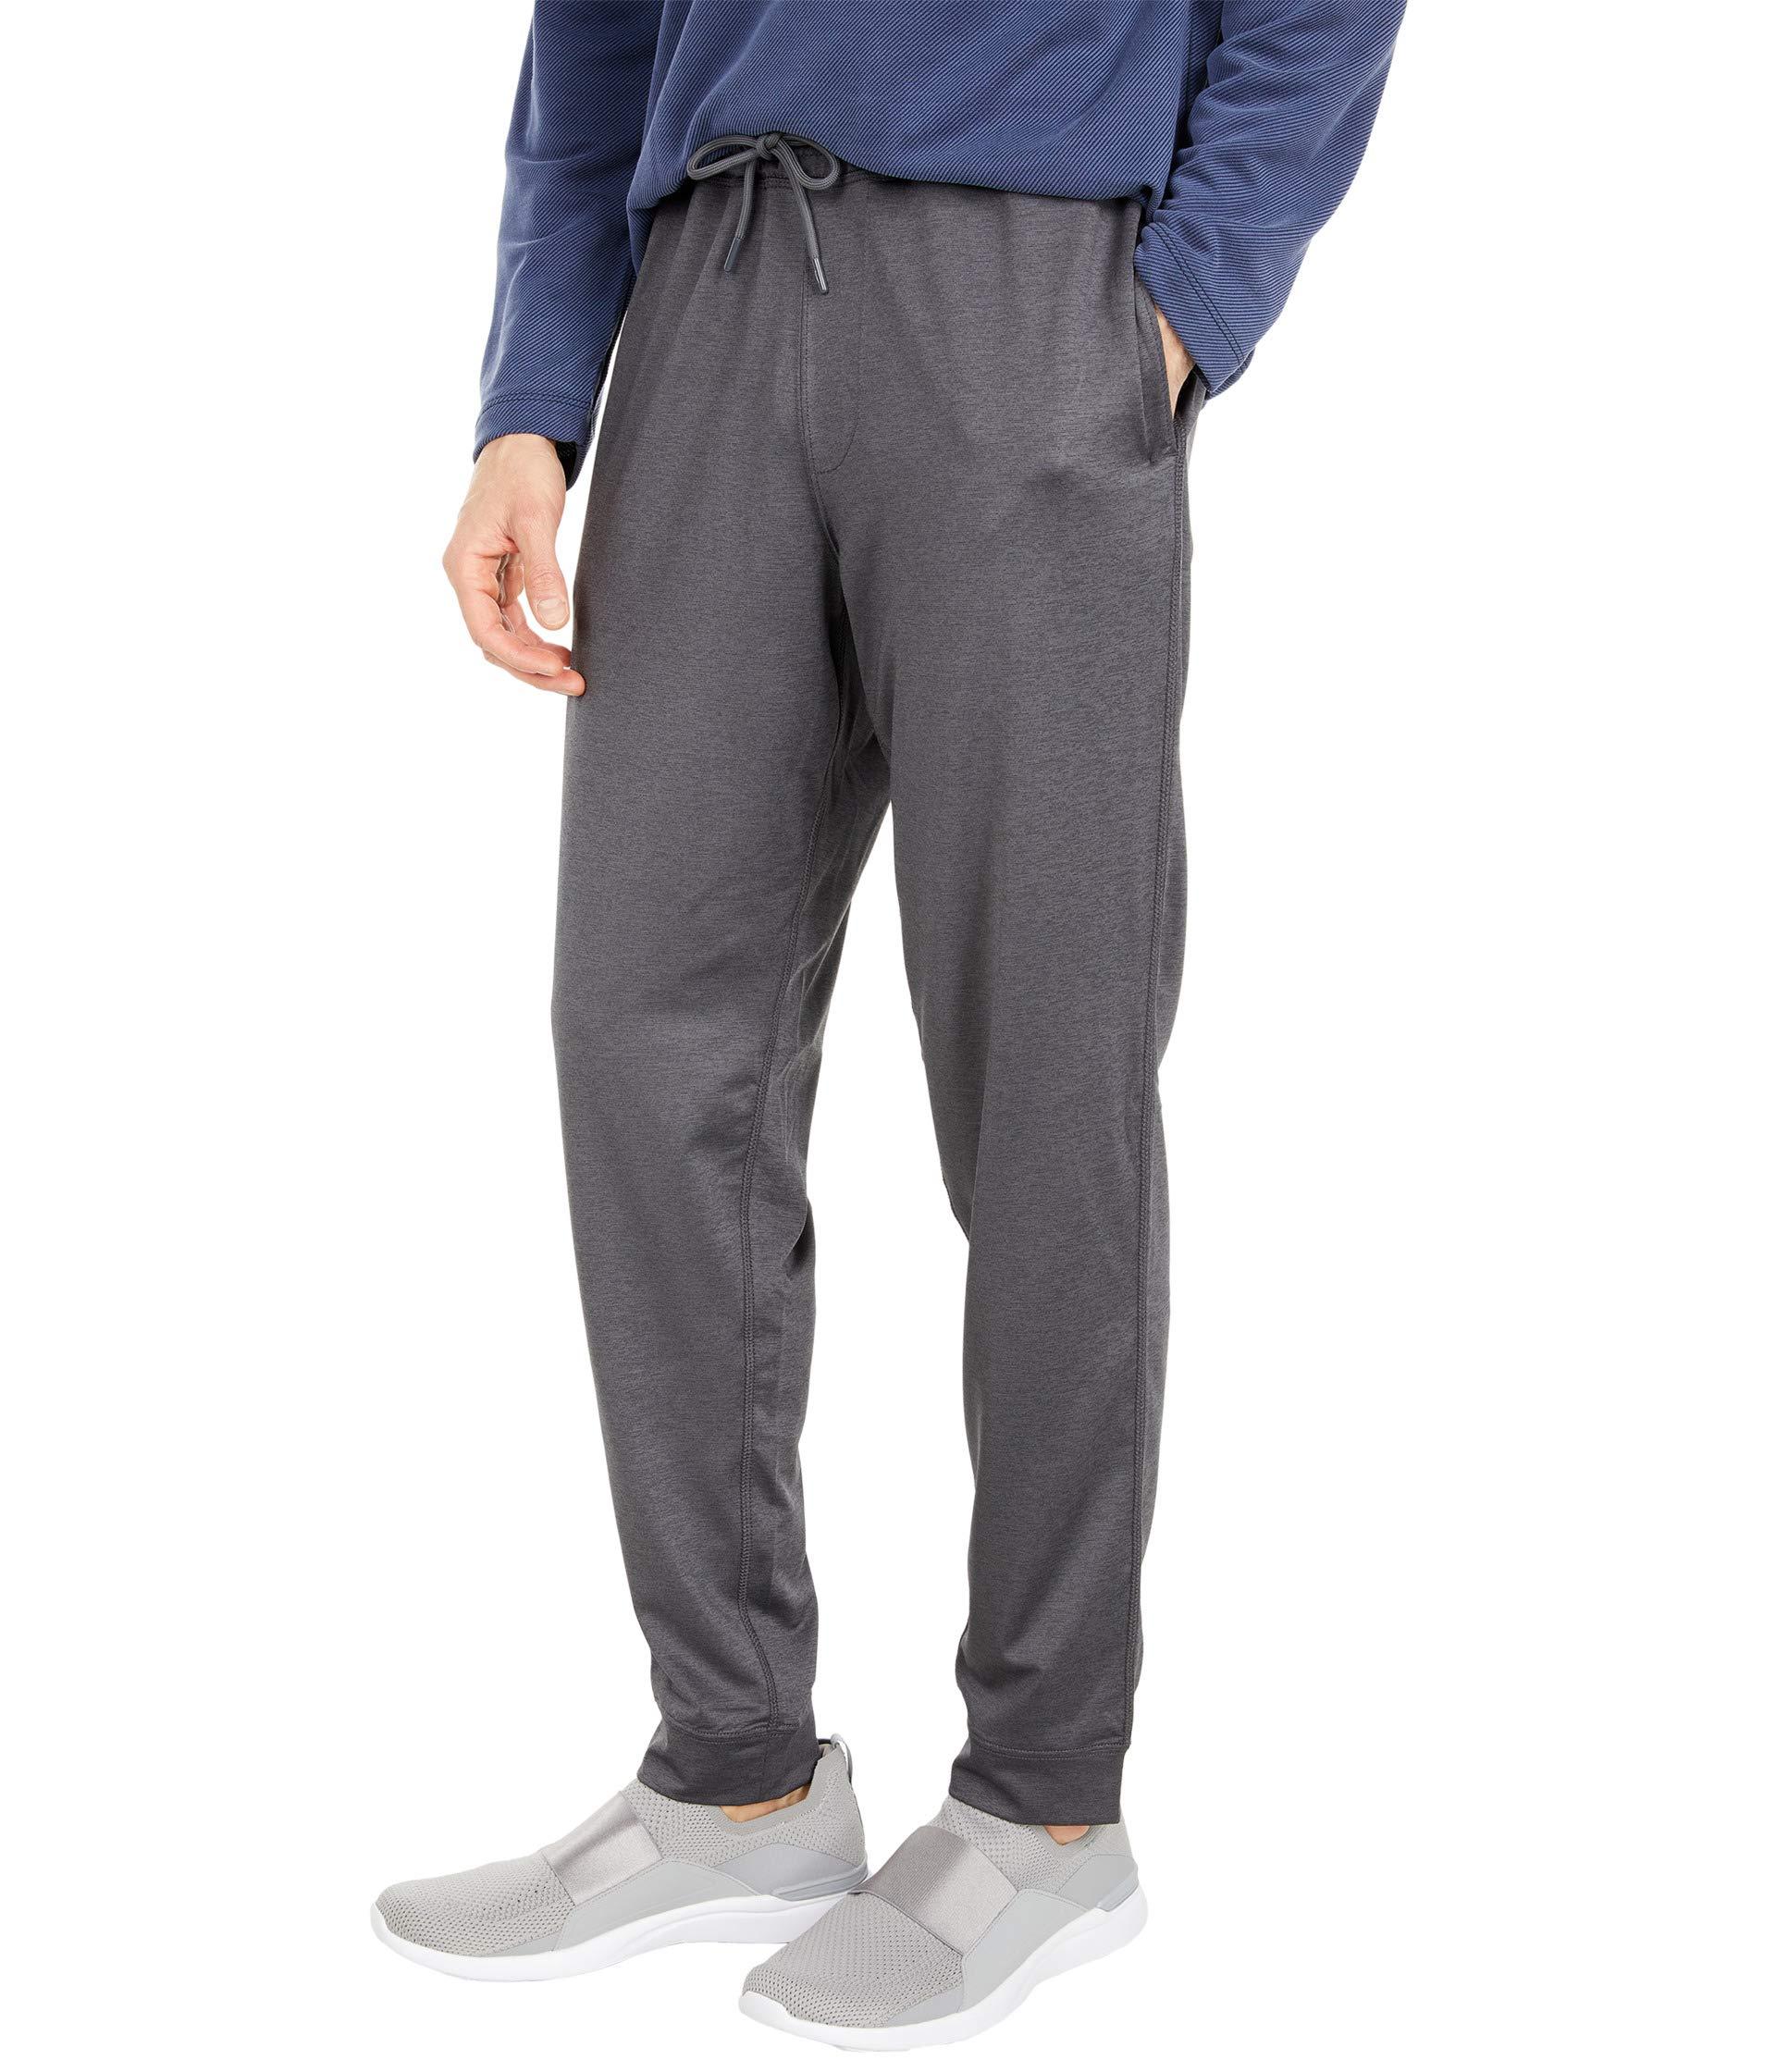 Tommy Bahama Synthetic Paseo Joggers in Gray for Men - Lyst